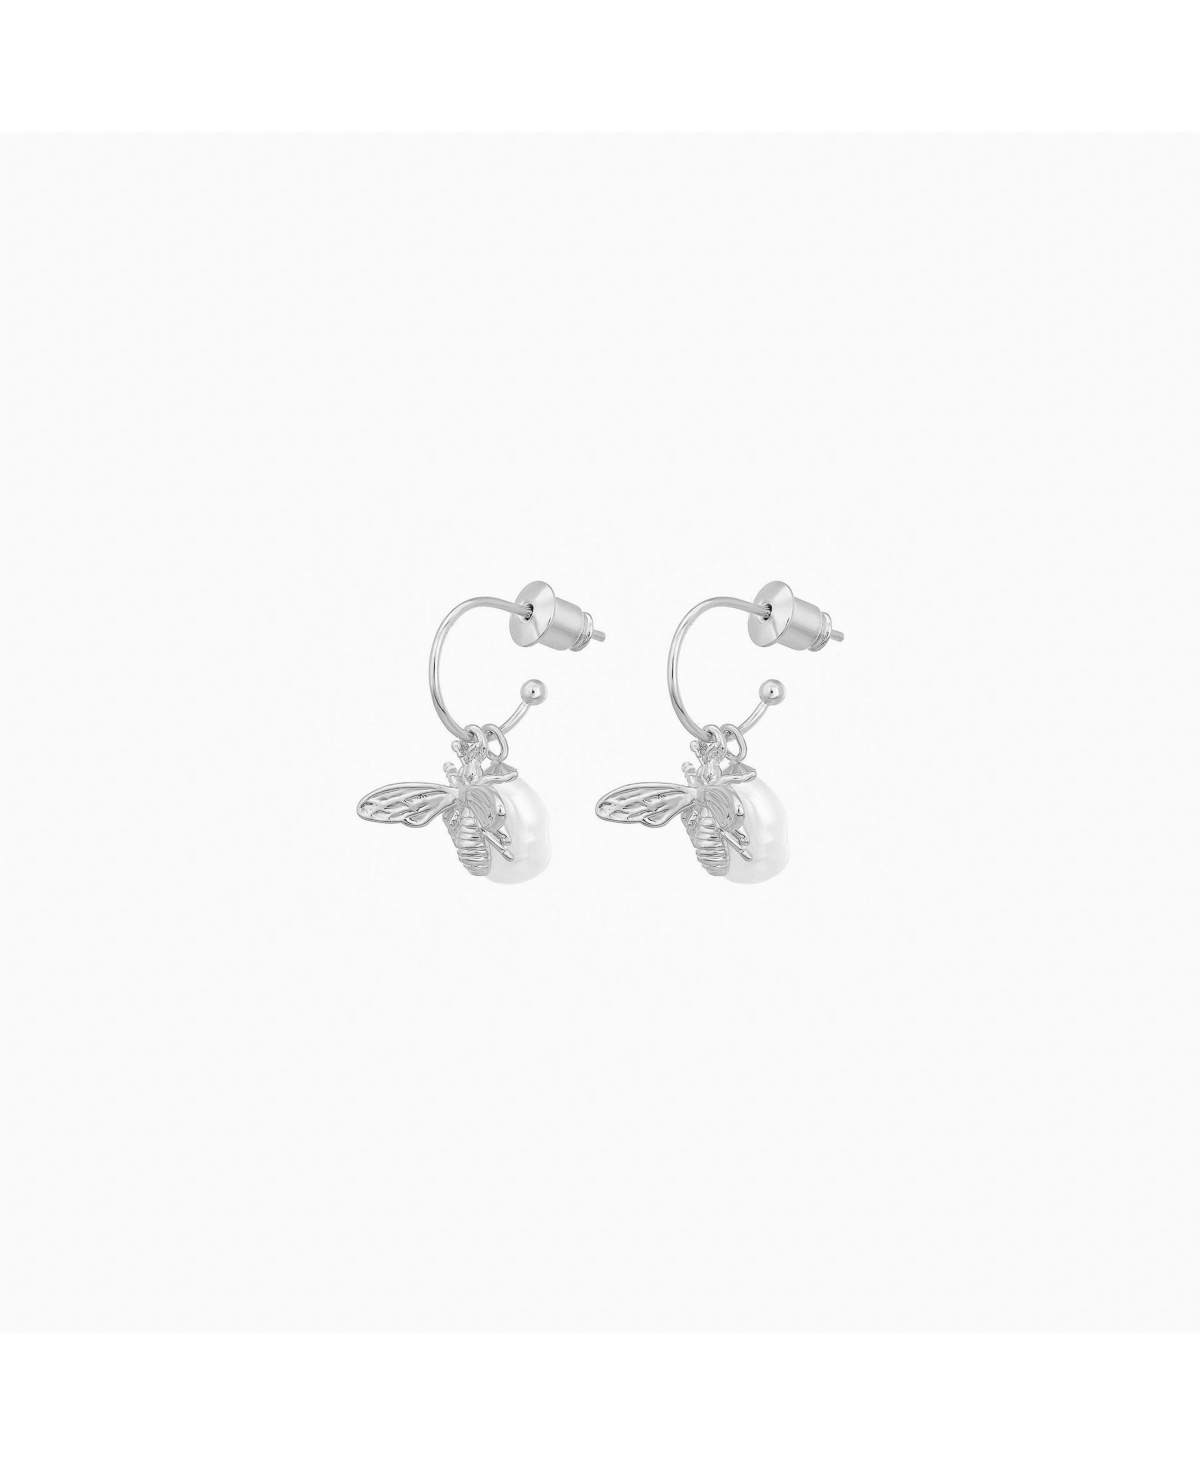 Bee Cultured Pearl Earrings - White gold